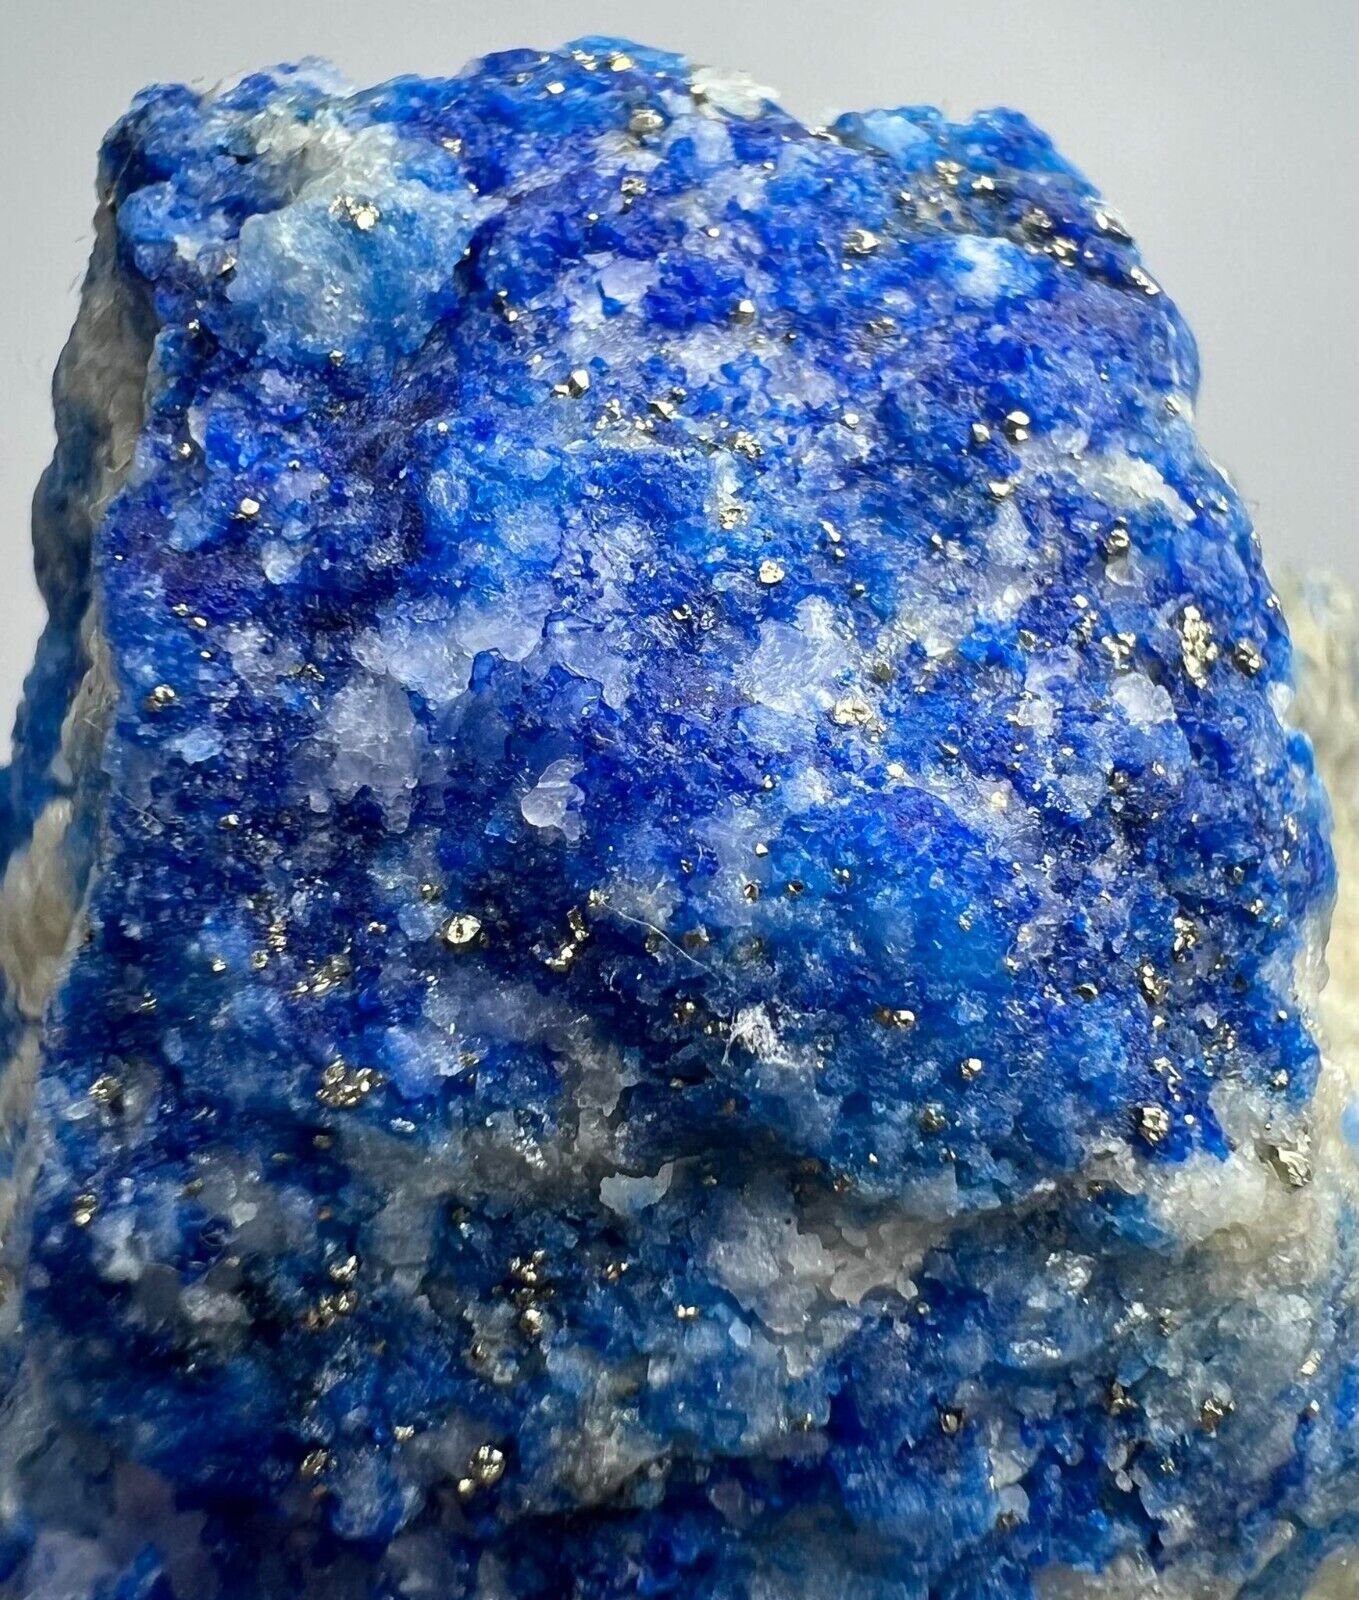 306 GM. Rare Natural Hauyne with Afghanite and Pyrite Inclusion on Matrix @AFG